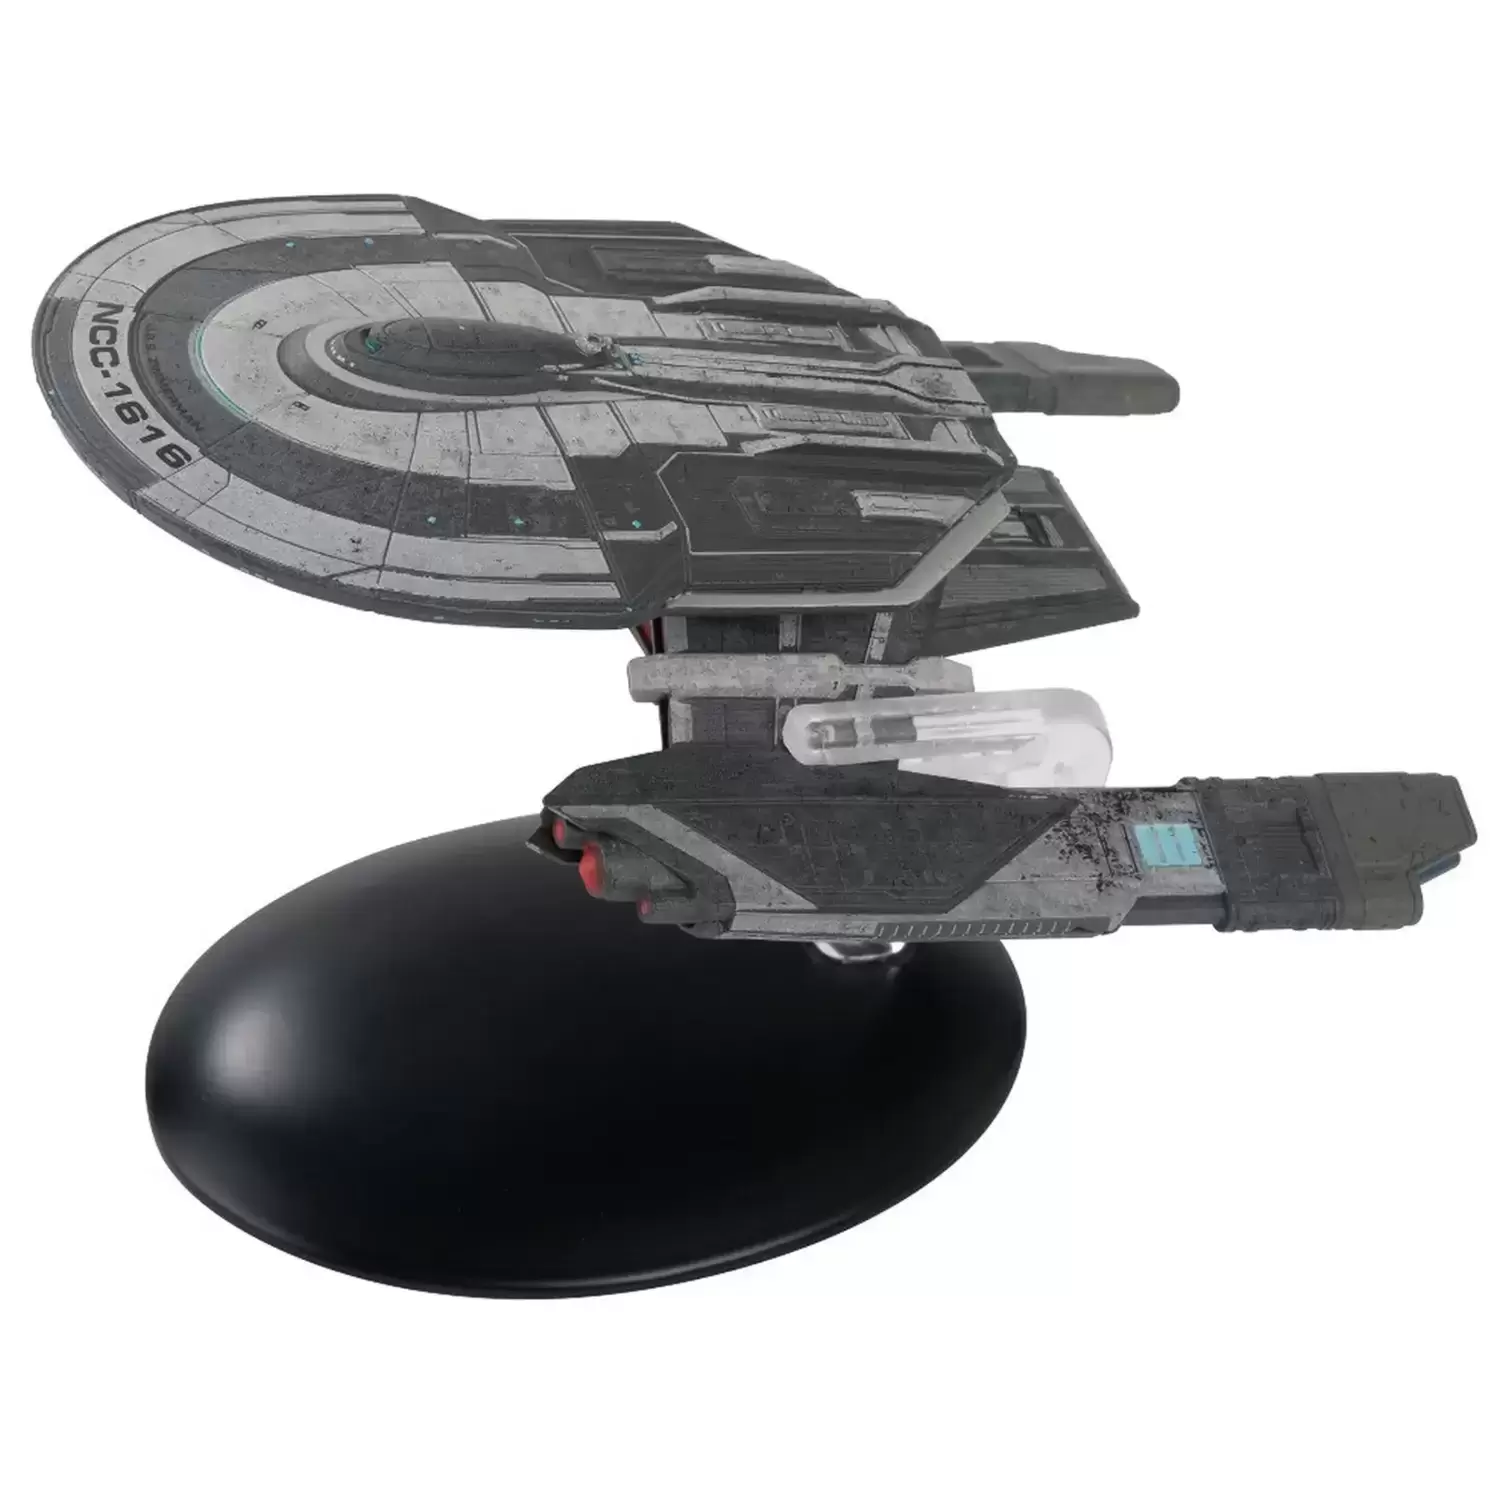 Star Trek Discovery The Official Starships Collection - U.S.S. Zimmerman NCC-1616 (Helios-class)